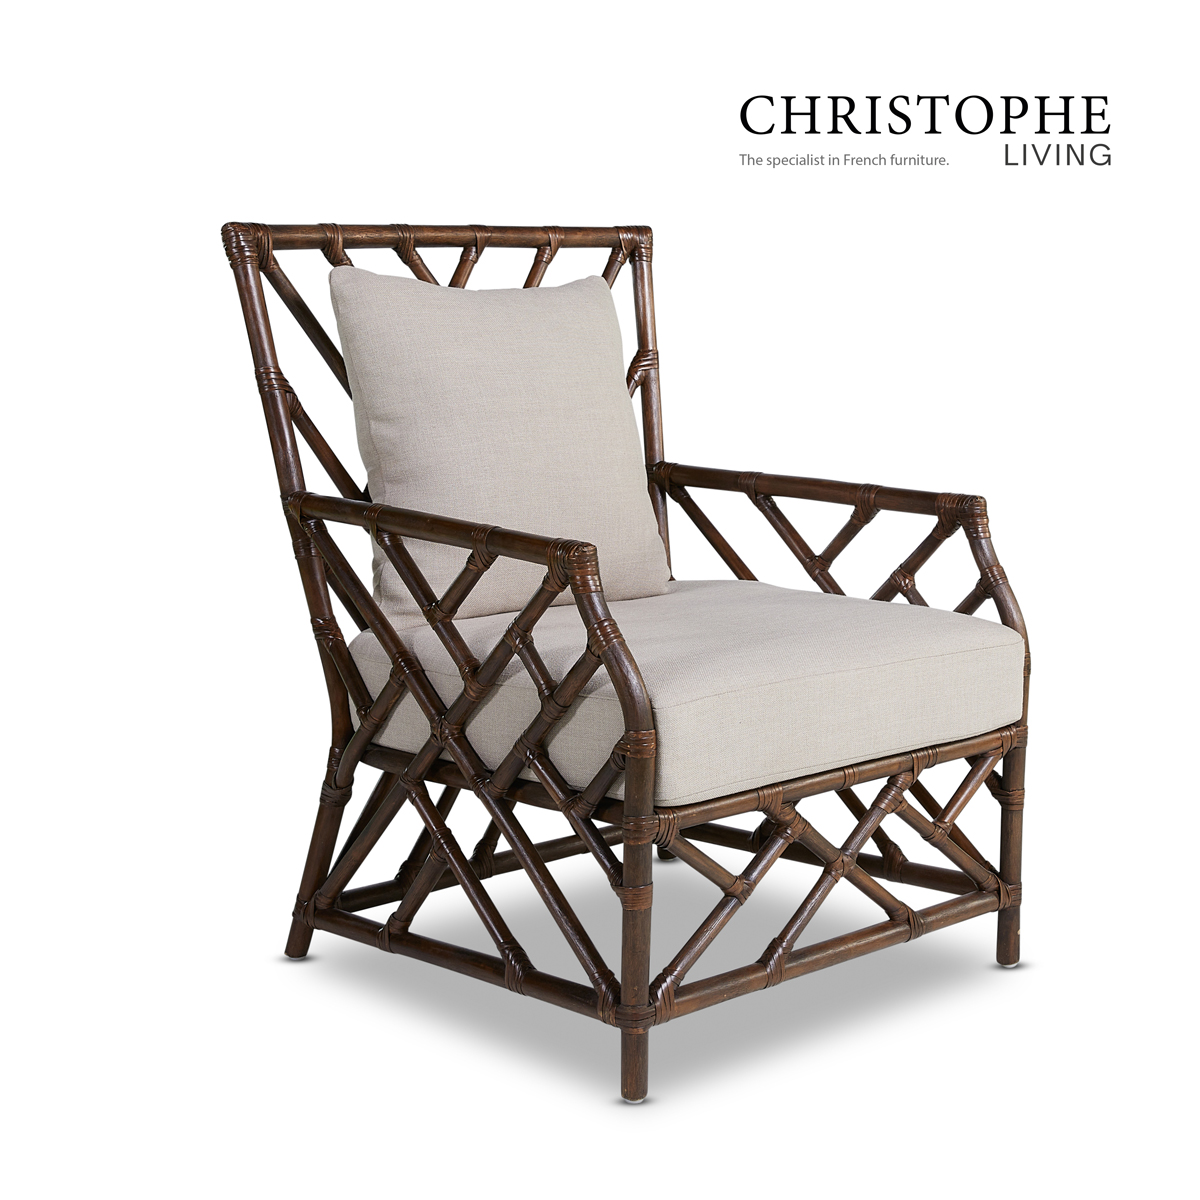 Qing French Provincial Living Room Lounge Chair in Coffee Bean Rattan with Herringbone Fabric Detail